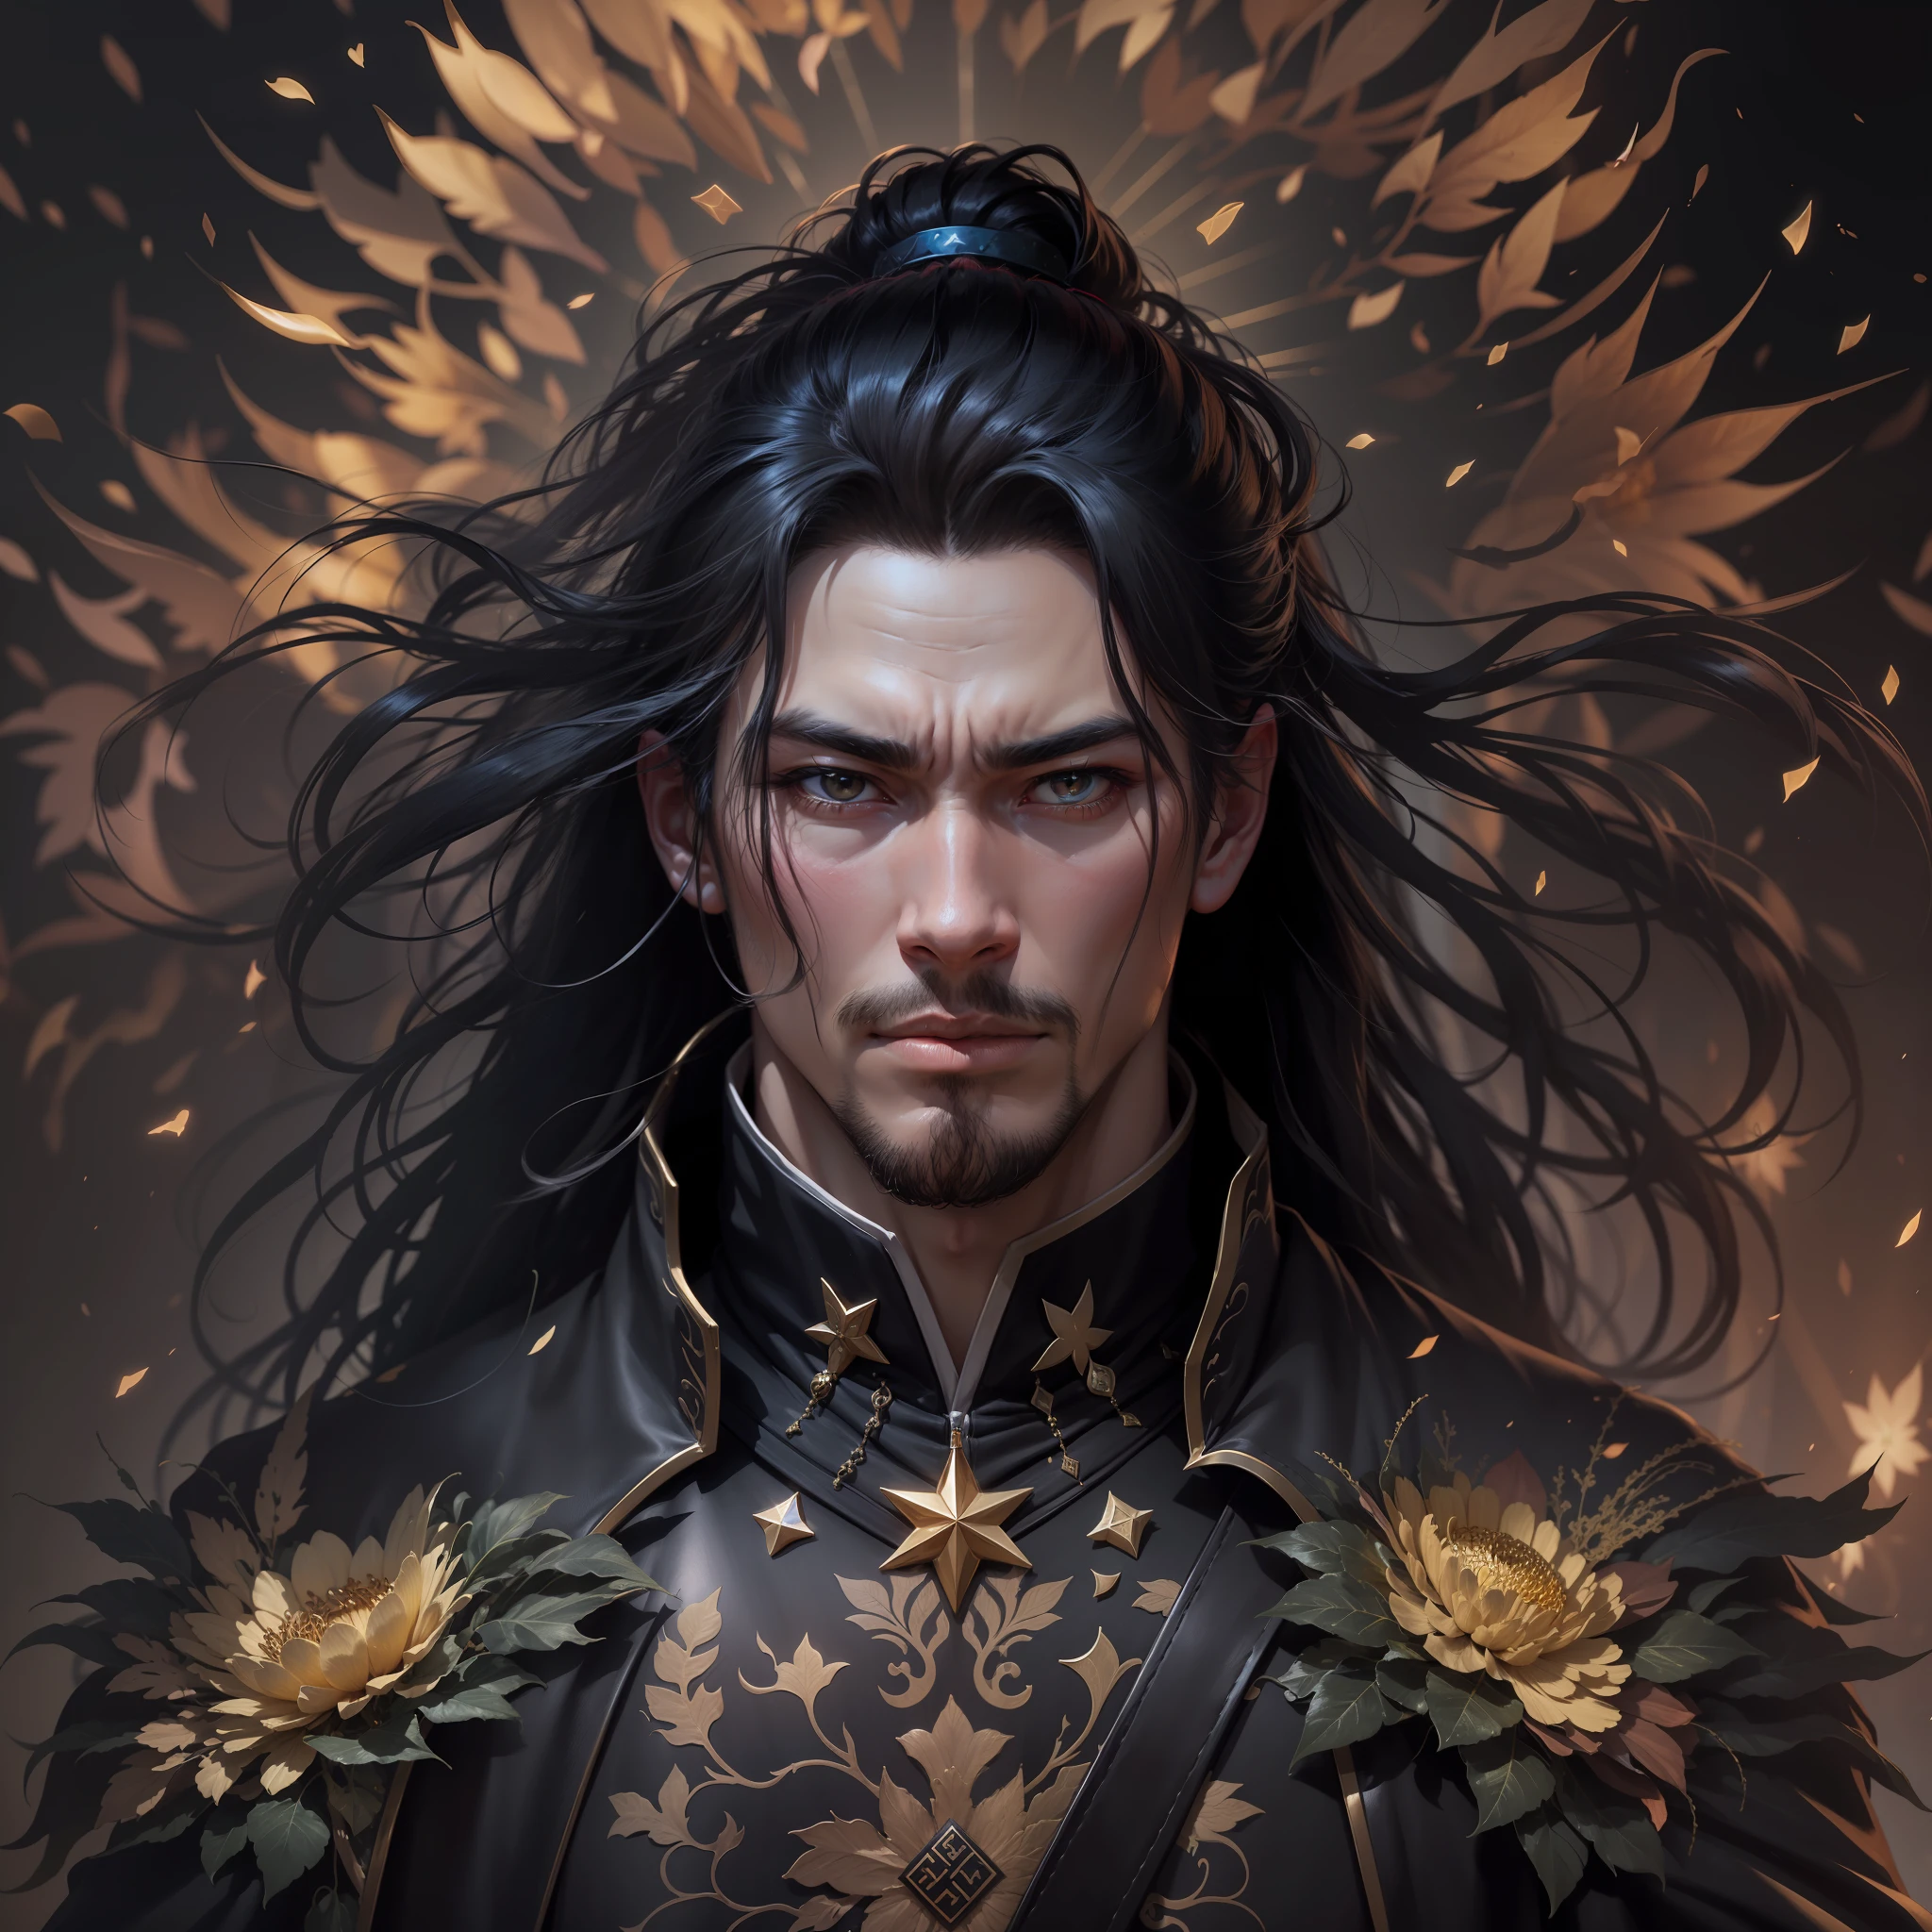 grown up, Mature man 35 years old.
European facial features. volitional, Companies in China. Dark Big, Oriental eyes.
Black long hair gathered in a Chinese ponytail.
ah high, muscular. 
Dressed in a black leather cloak, with metal shoulder pads. In his right hand he holds a sword, the left one is raised above the head and a chrysanthemum flower sparkles in it, What scatters star rays.
fantasy world.  Blend of black gold, Gold Pattern, Dragon Pattern Road, prince, palace.  Lightning effect.